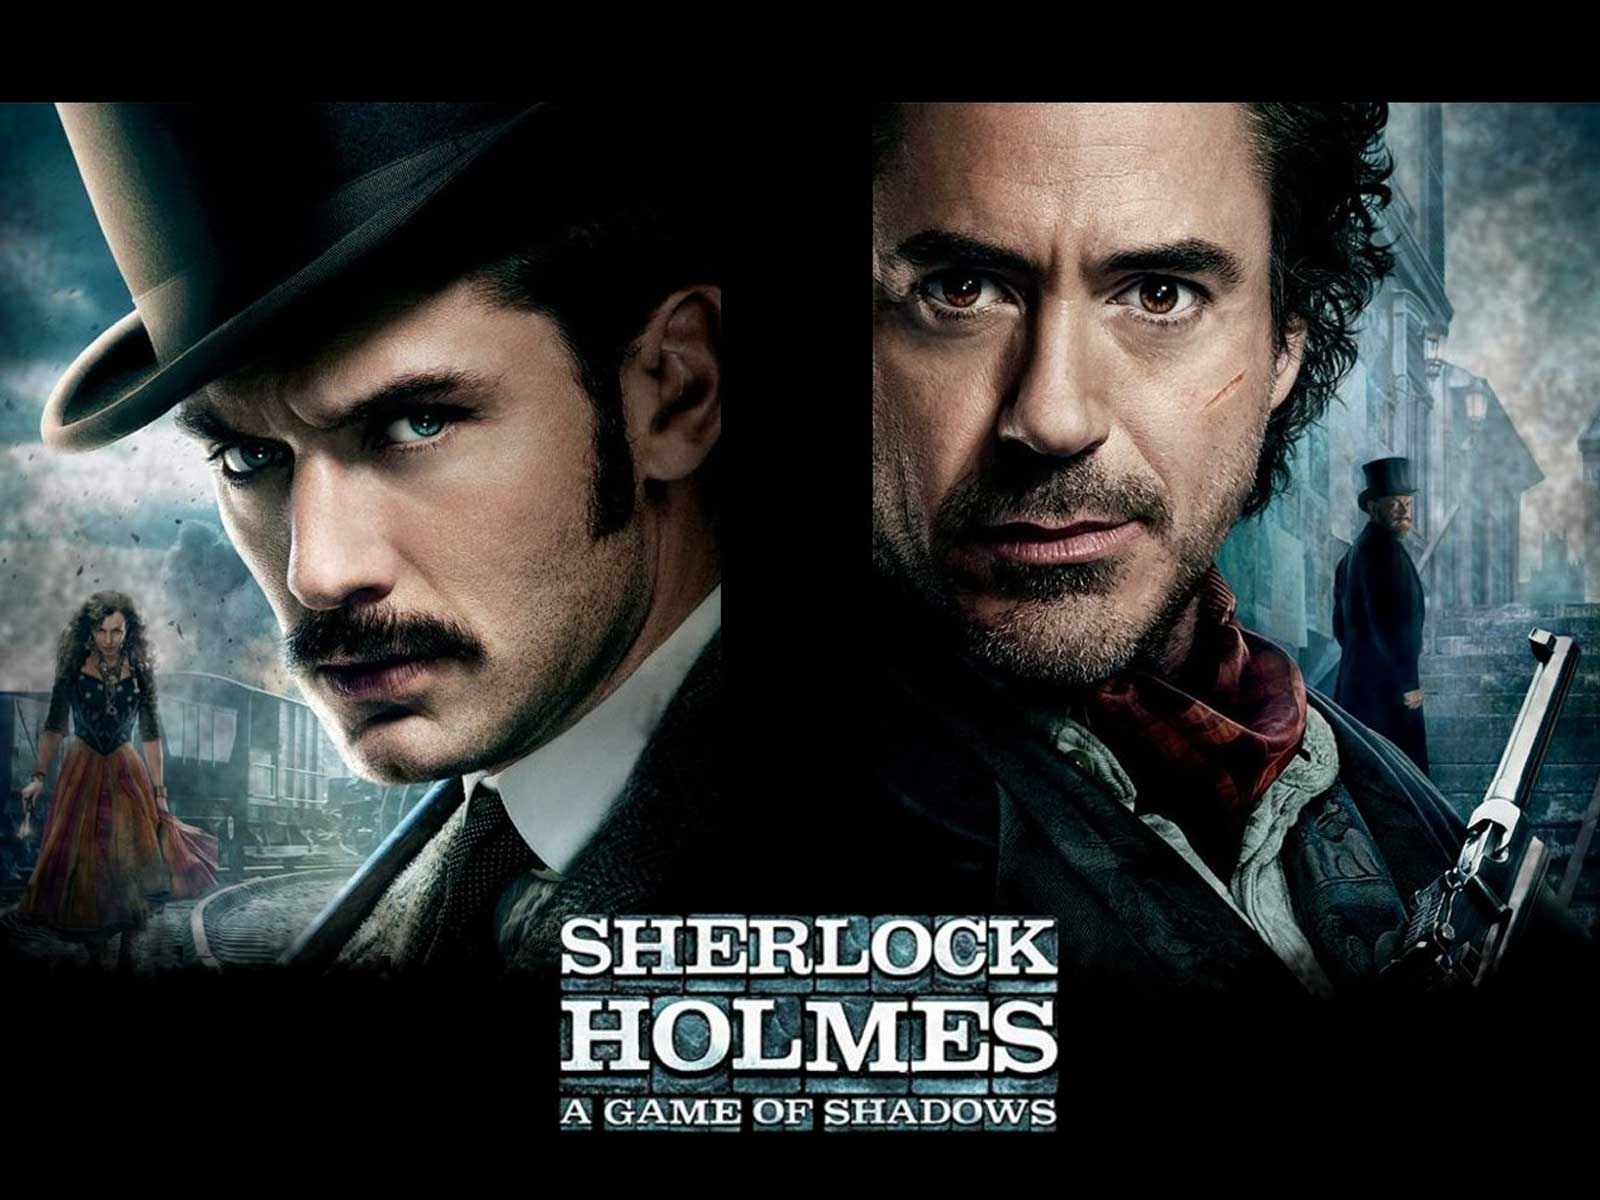 Sherlock Holmes: A Game of Shadows HD Wallpapers #12 - 1600x1200